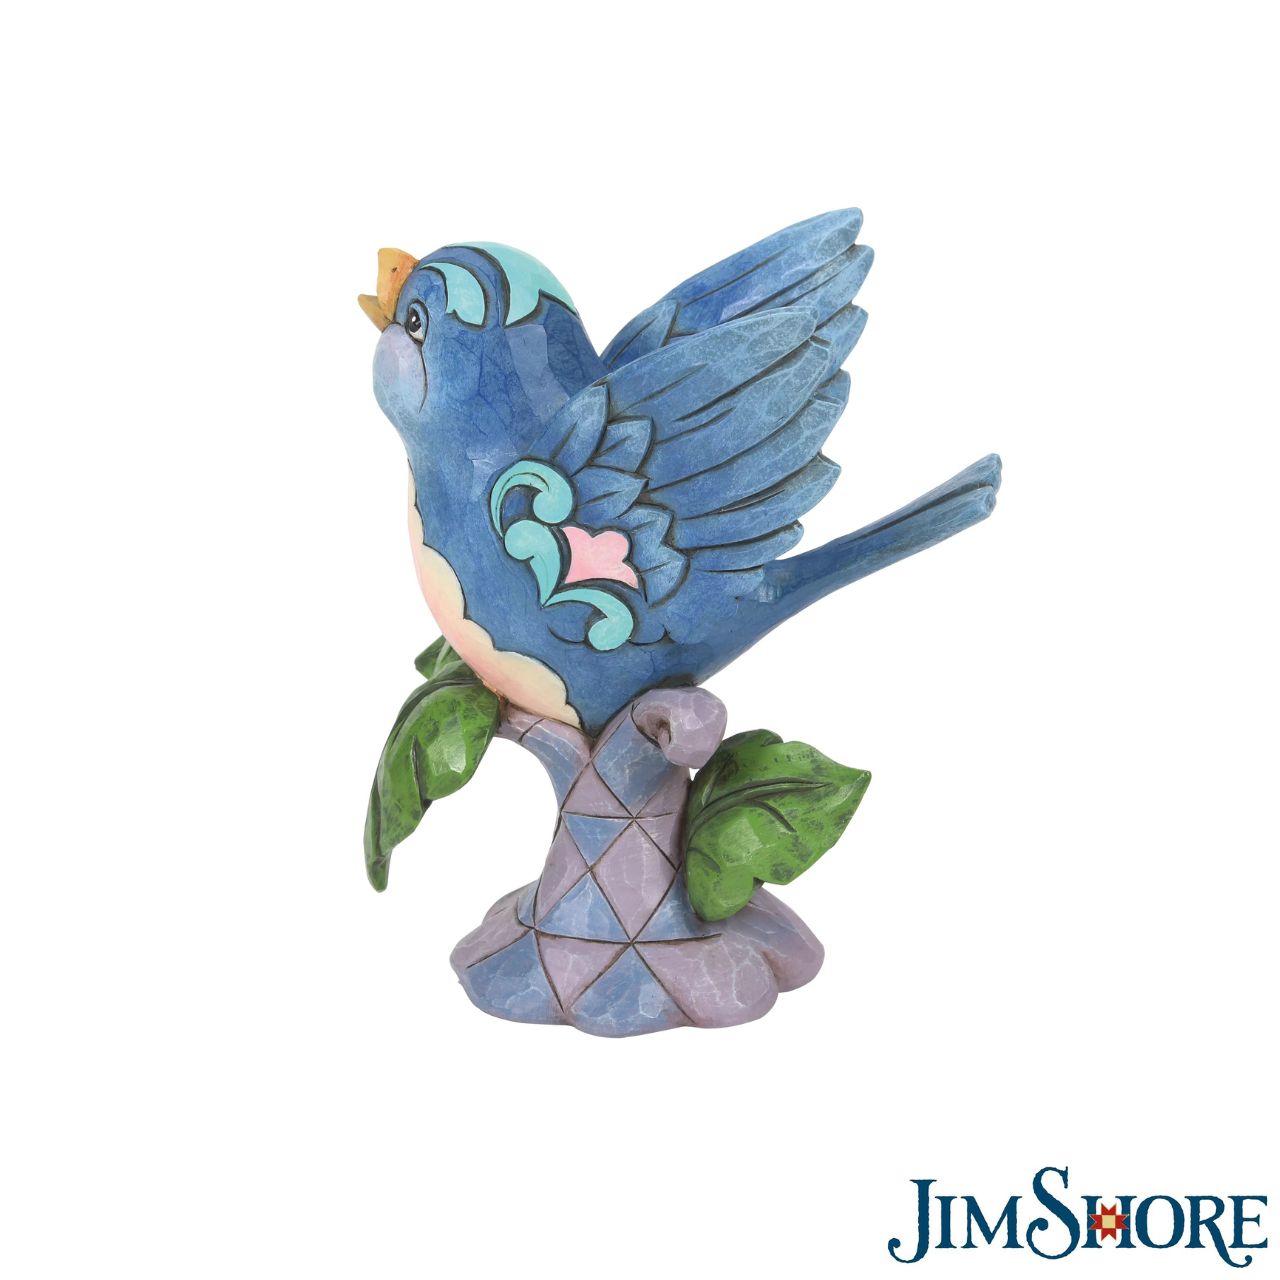 Bluebird on Branch Figurine "Sweet Songs of Happiness" by Jim Shore   "Sweet Songs of Happiness" A colourful accent to brighten your day, Jim Shore's richly detailed Bluebird design features a combination of subtle quilt patterning and beautifully hand-crafted rosemaling motifs.